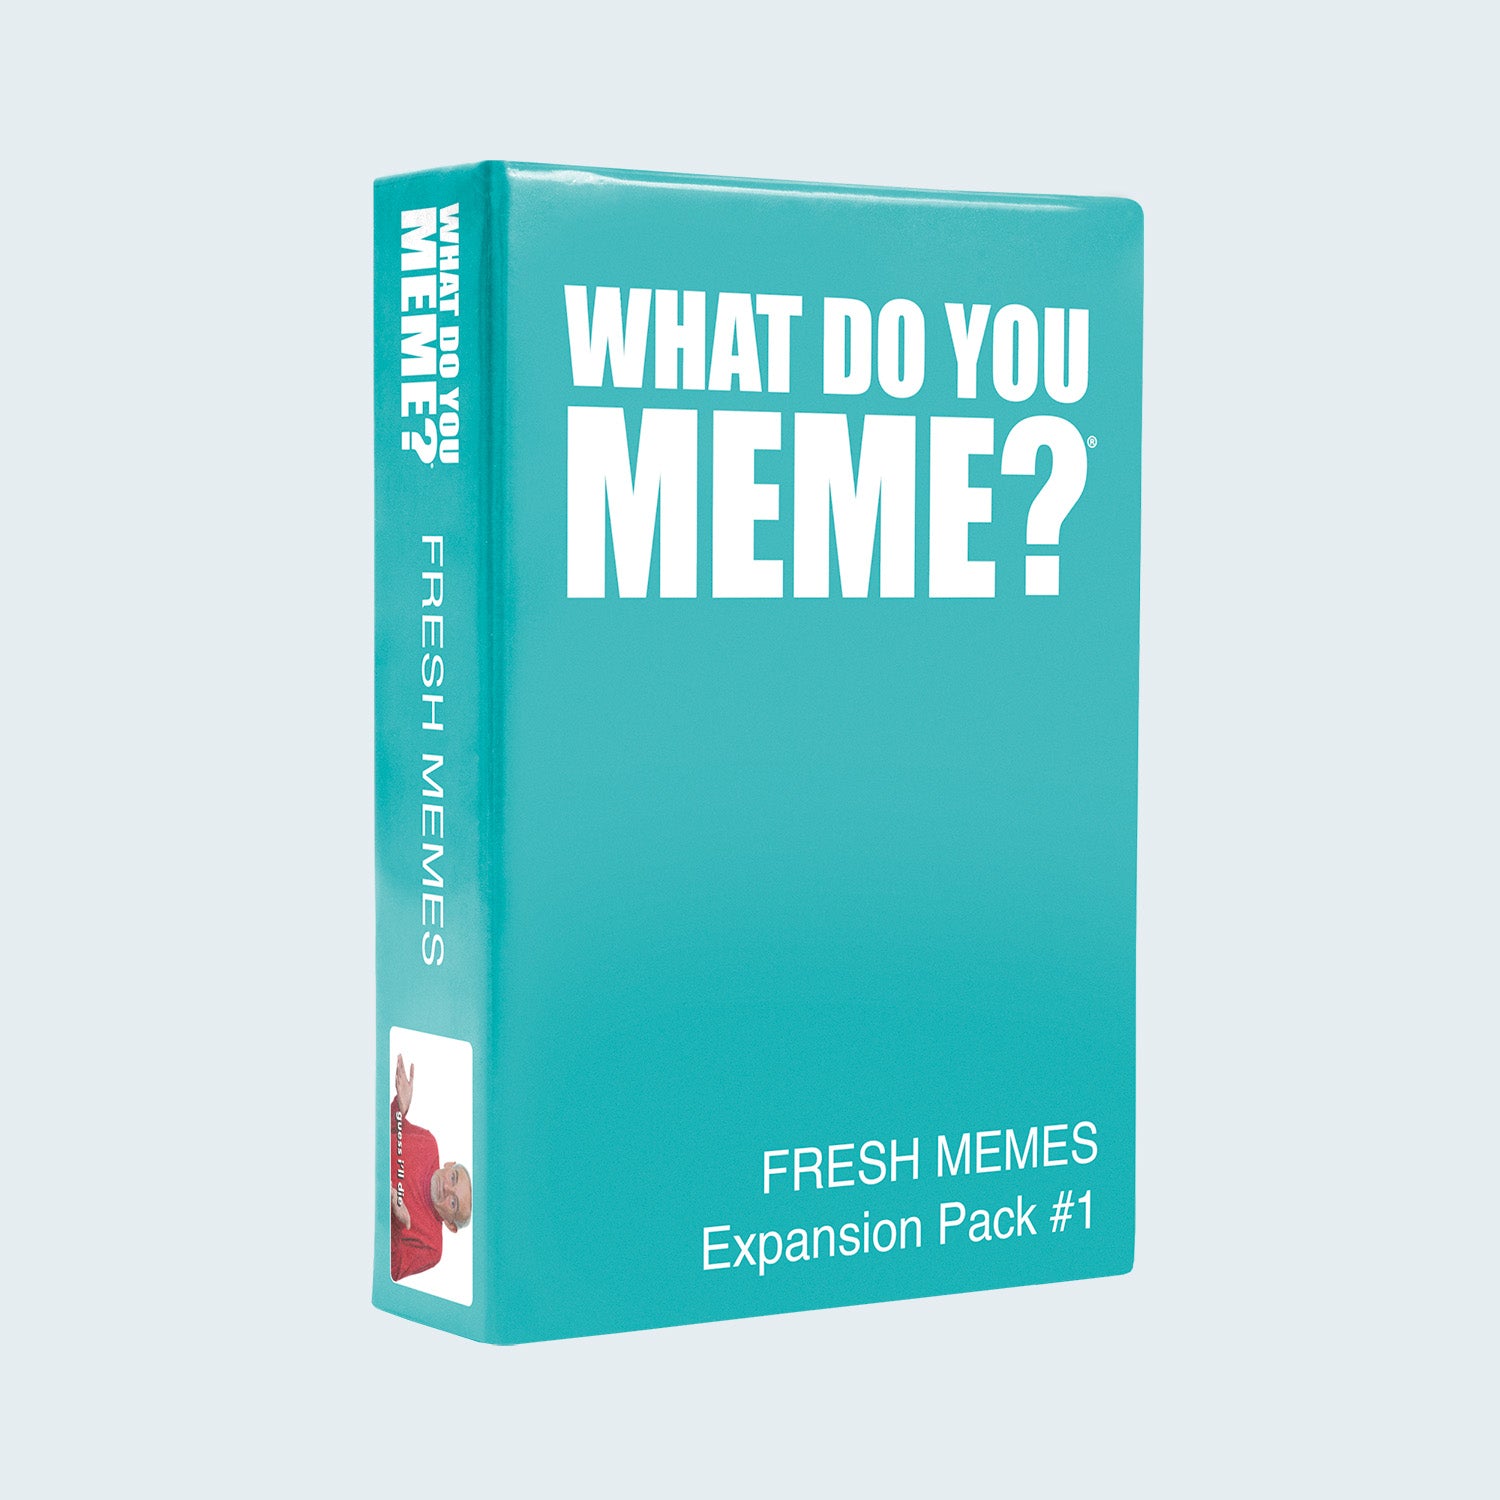 fresh-memes-expansion-pack-game-box-and-game-play-01-what-do-you-meme-by-relatable